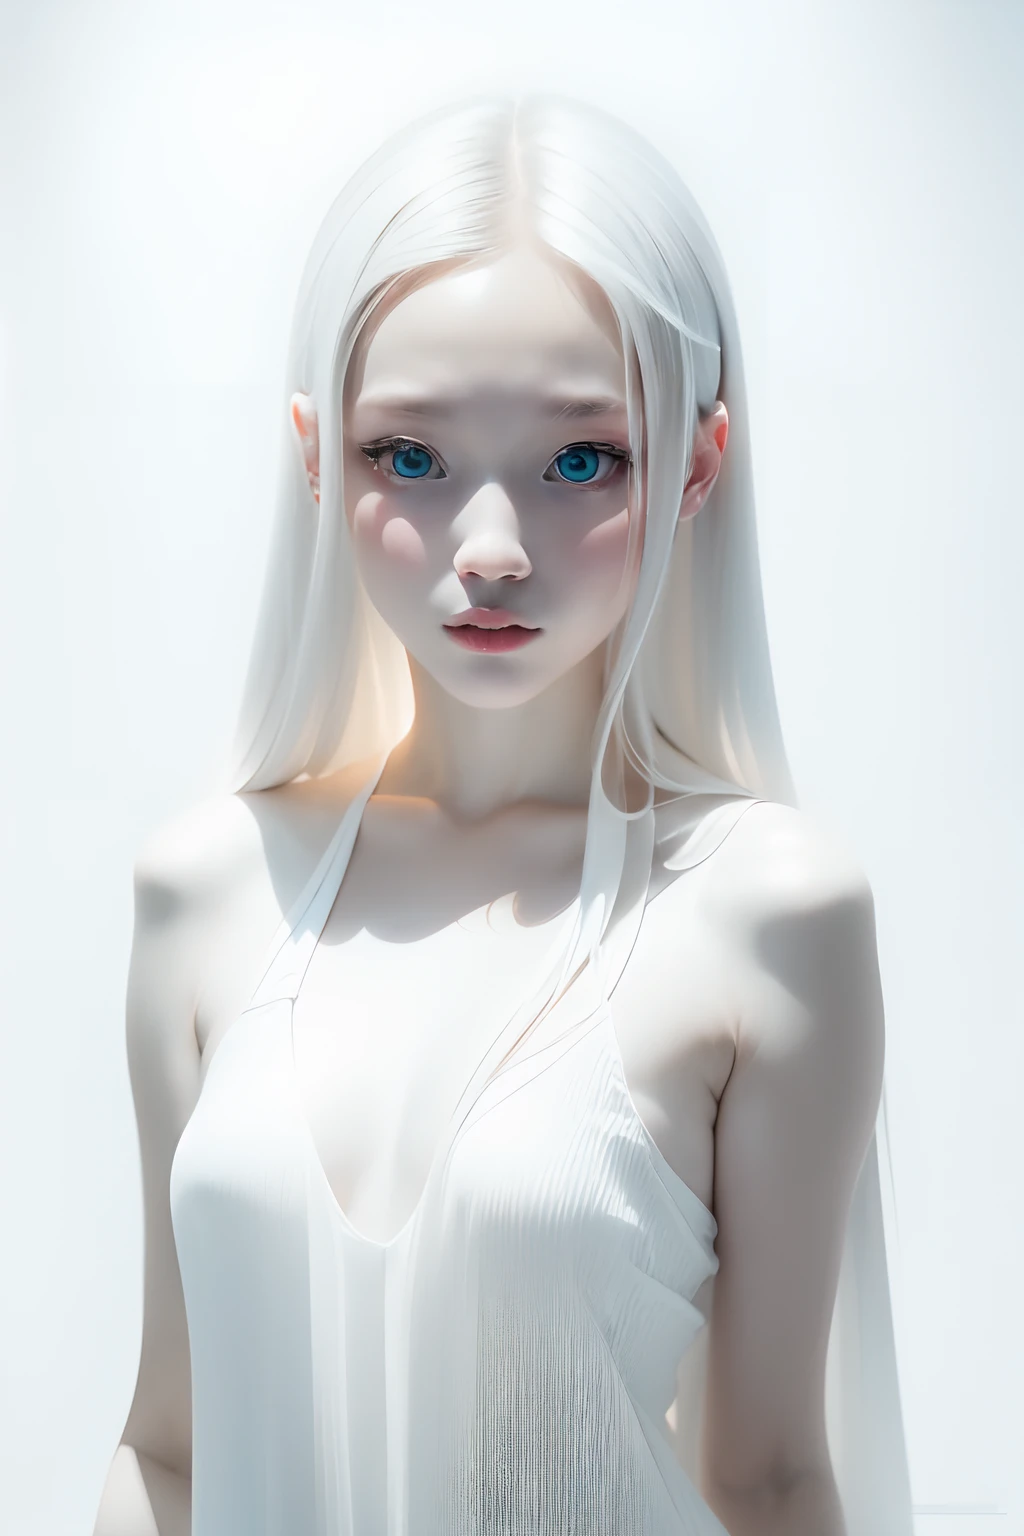 (((White background:1.3)))、Best Quality, masuter piece, High resolution, albino girl、(((1girl in))), sixteen years old,(((eyes are white:1.3)))、robe blanche、((White shirt:1.3、White Block Dress)), Tindall Effect, Realistic, Shadow Studio,Ultramarine Lighting, dual-tone lighting, (High Detail Skins: 1.2)、Pale colored lighting、Dark lighting、 Digital SLR, Photo, High resolution, 4K, 8K, Background blur,Fade out beautifully、a white world、White background